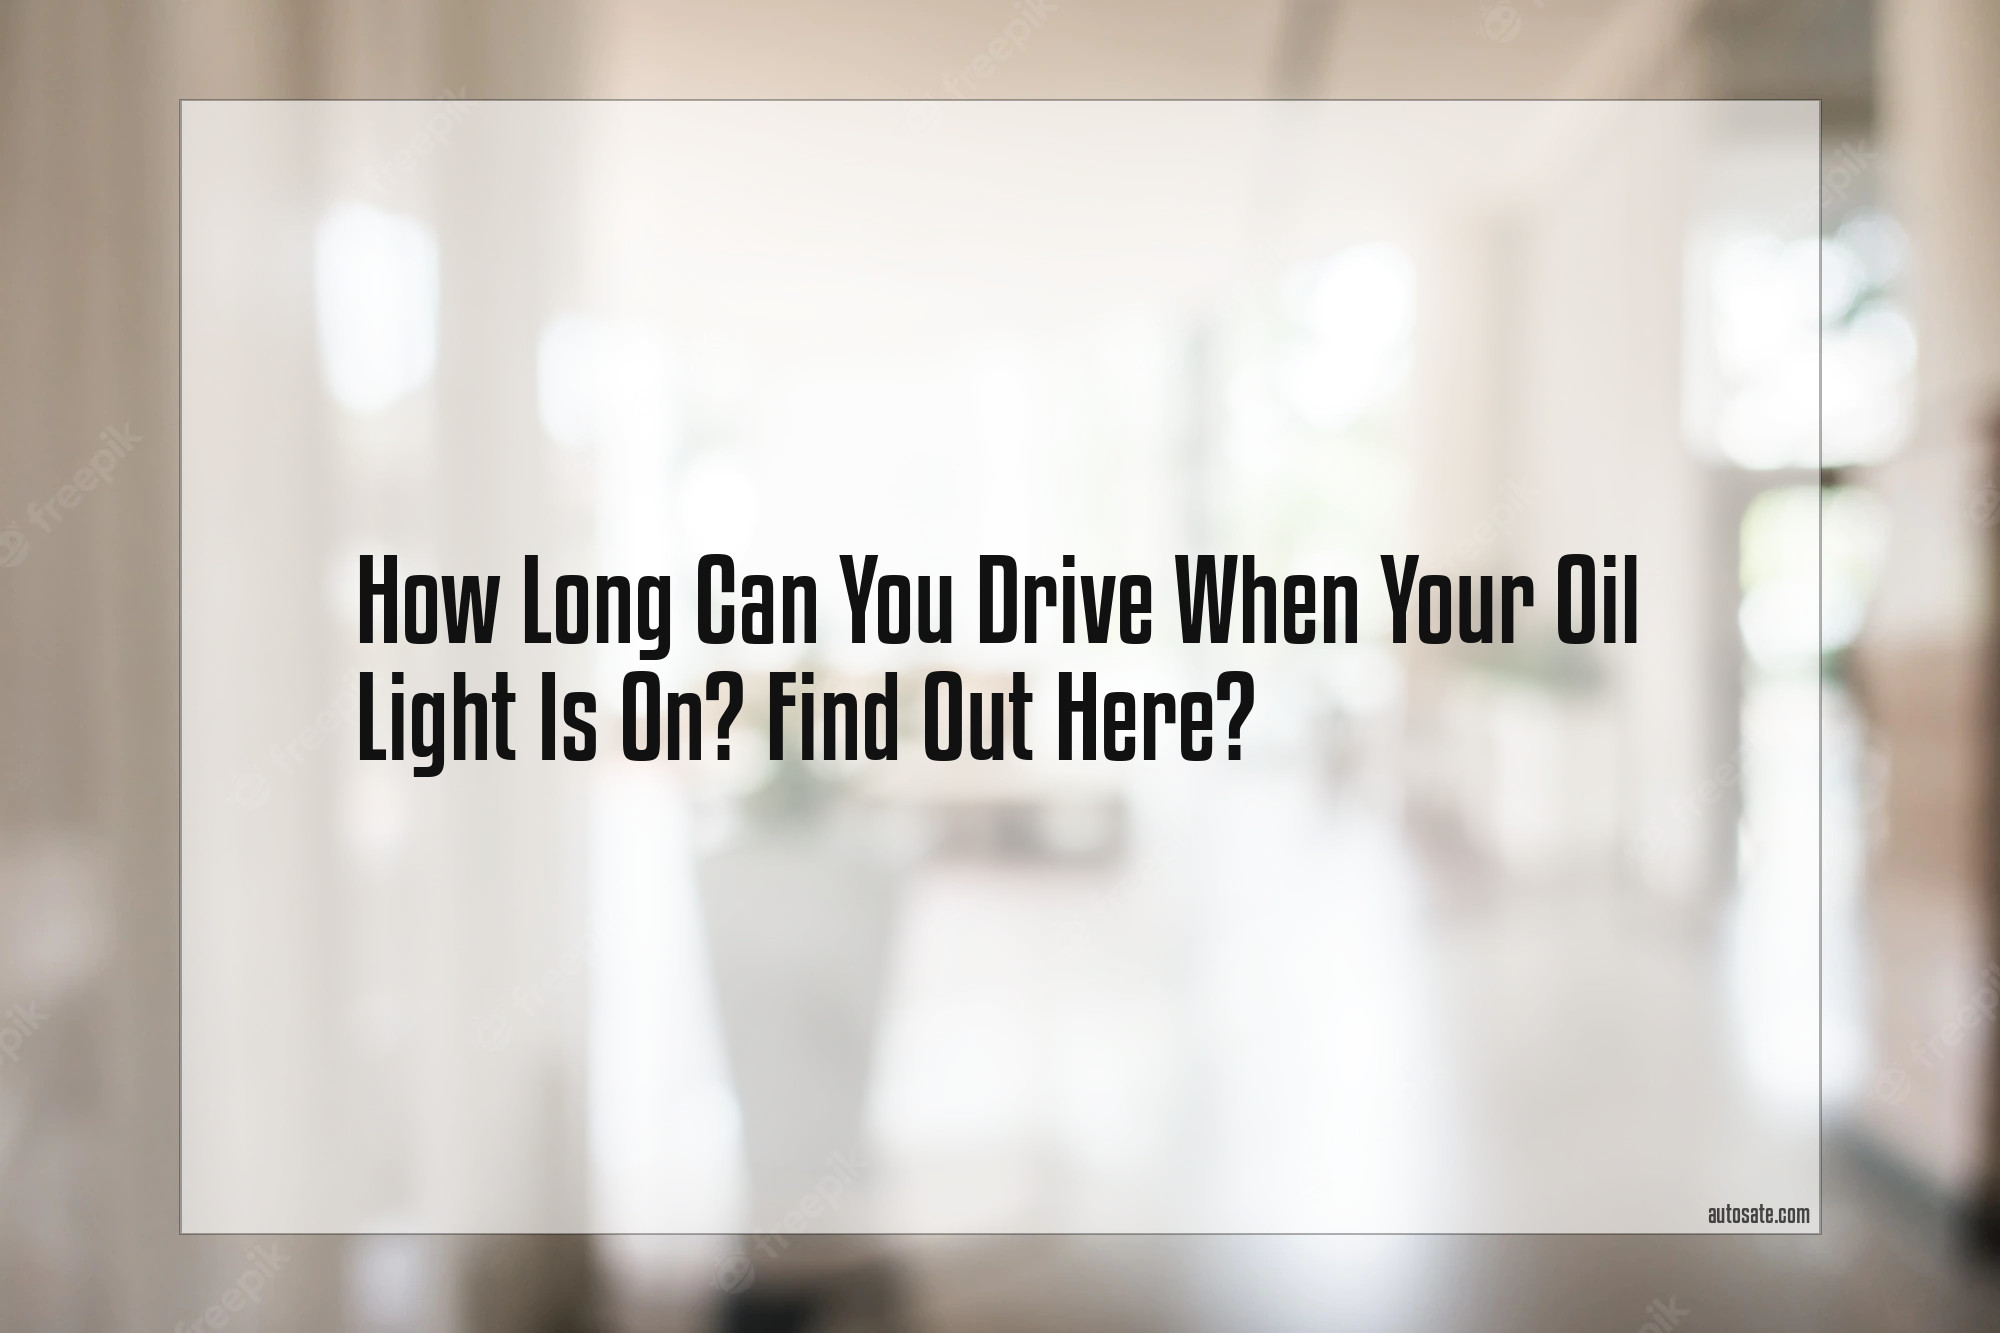 How Long Can You Drive When Your Oil Light Is On? Find Out Here